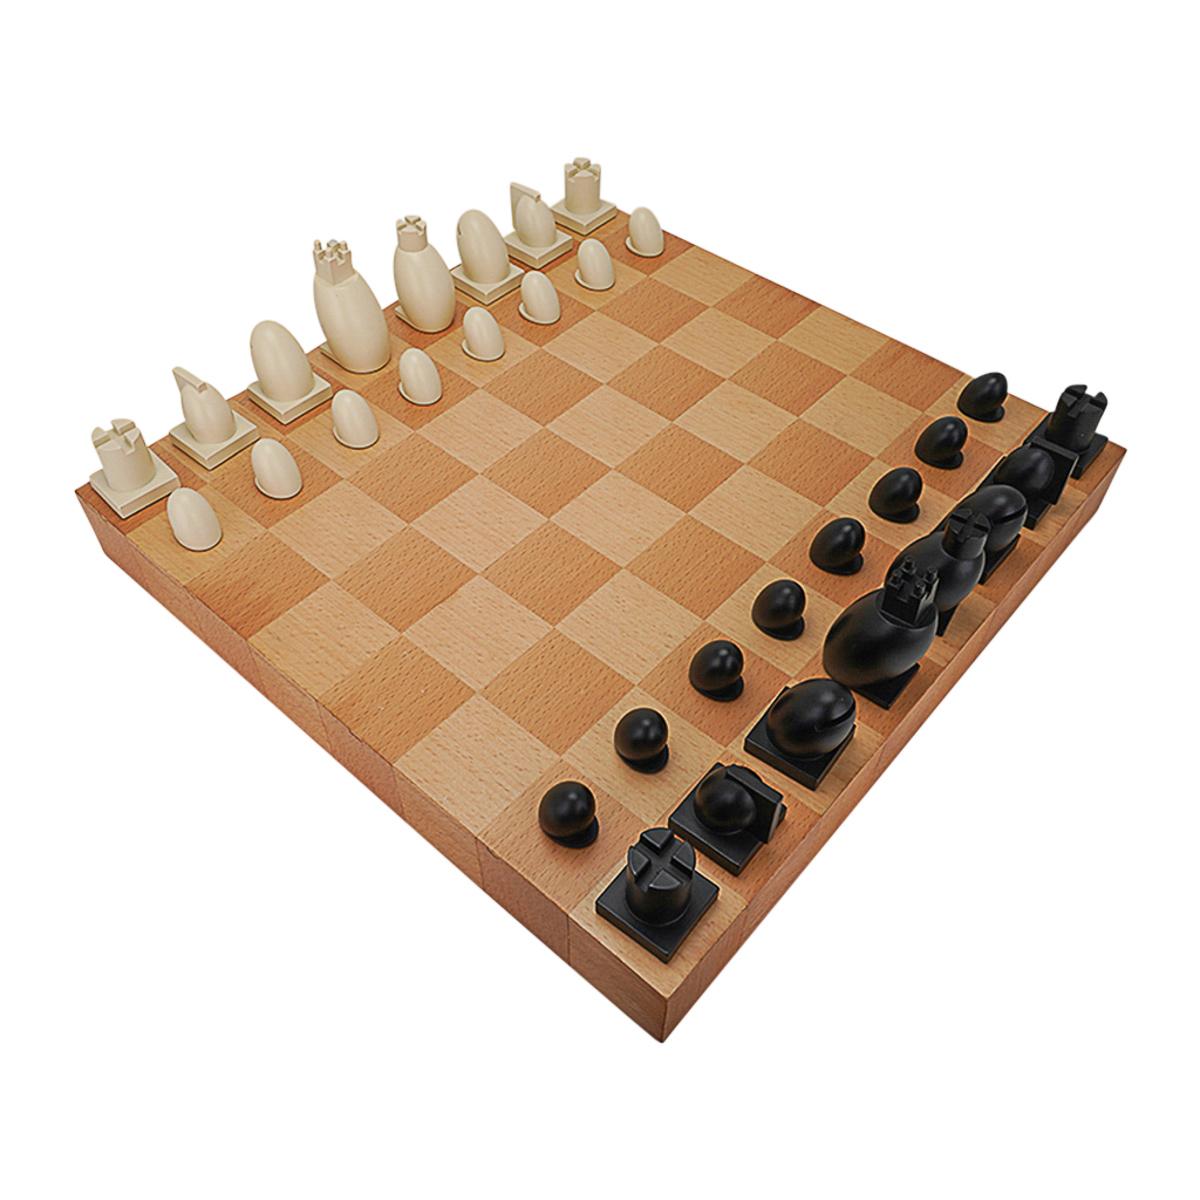 Michael Graves postmodern chess and checkers set.
Maplewood board with resin chess pieces in Black and White.
The board lifts up to reveal the velvet lined storage for all the pieces.
Each piece is signed Graves.
A member of the Post-Modernist